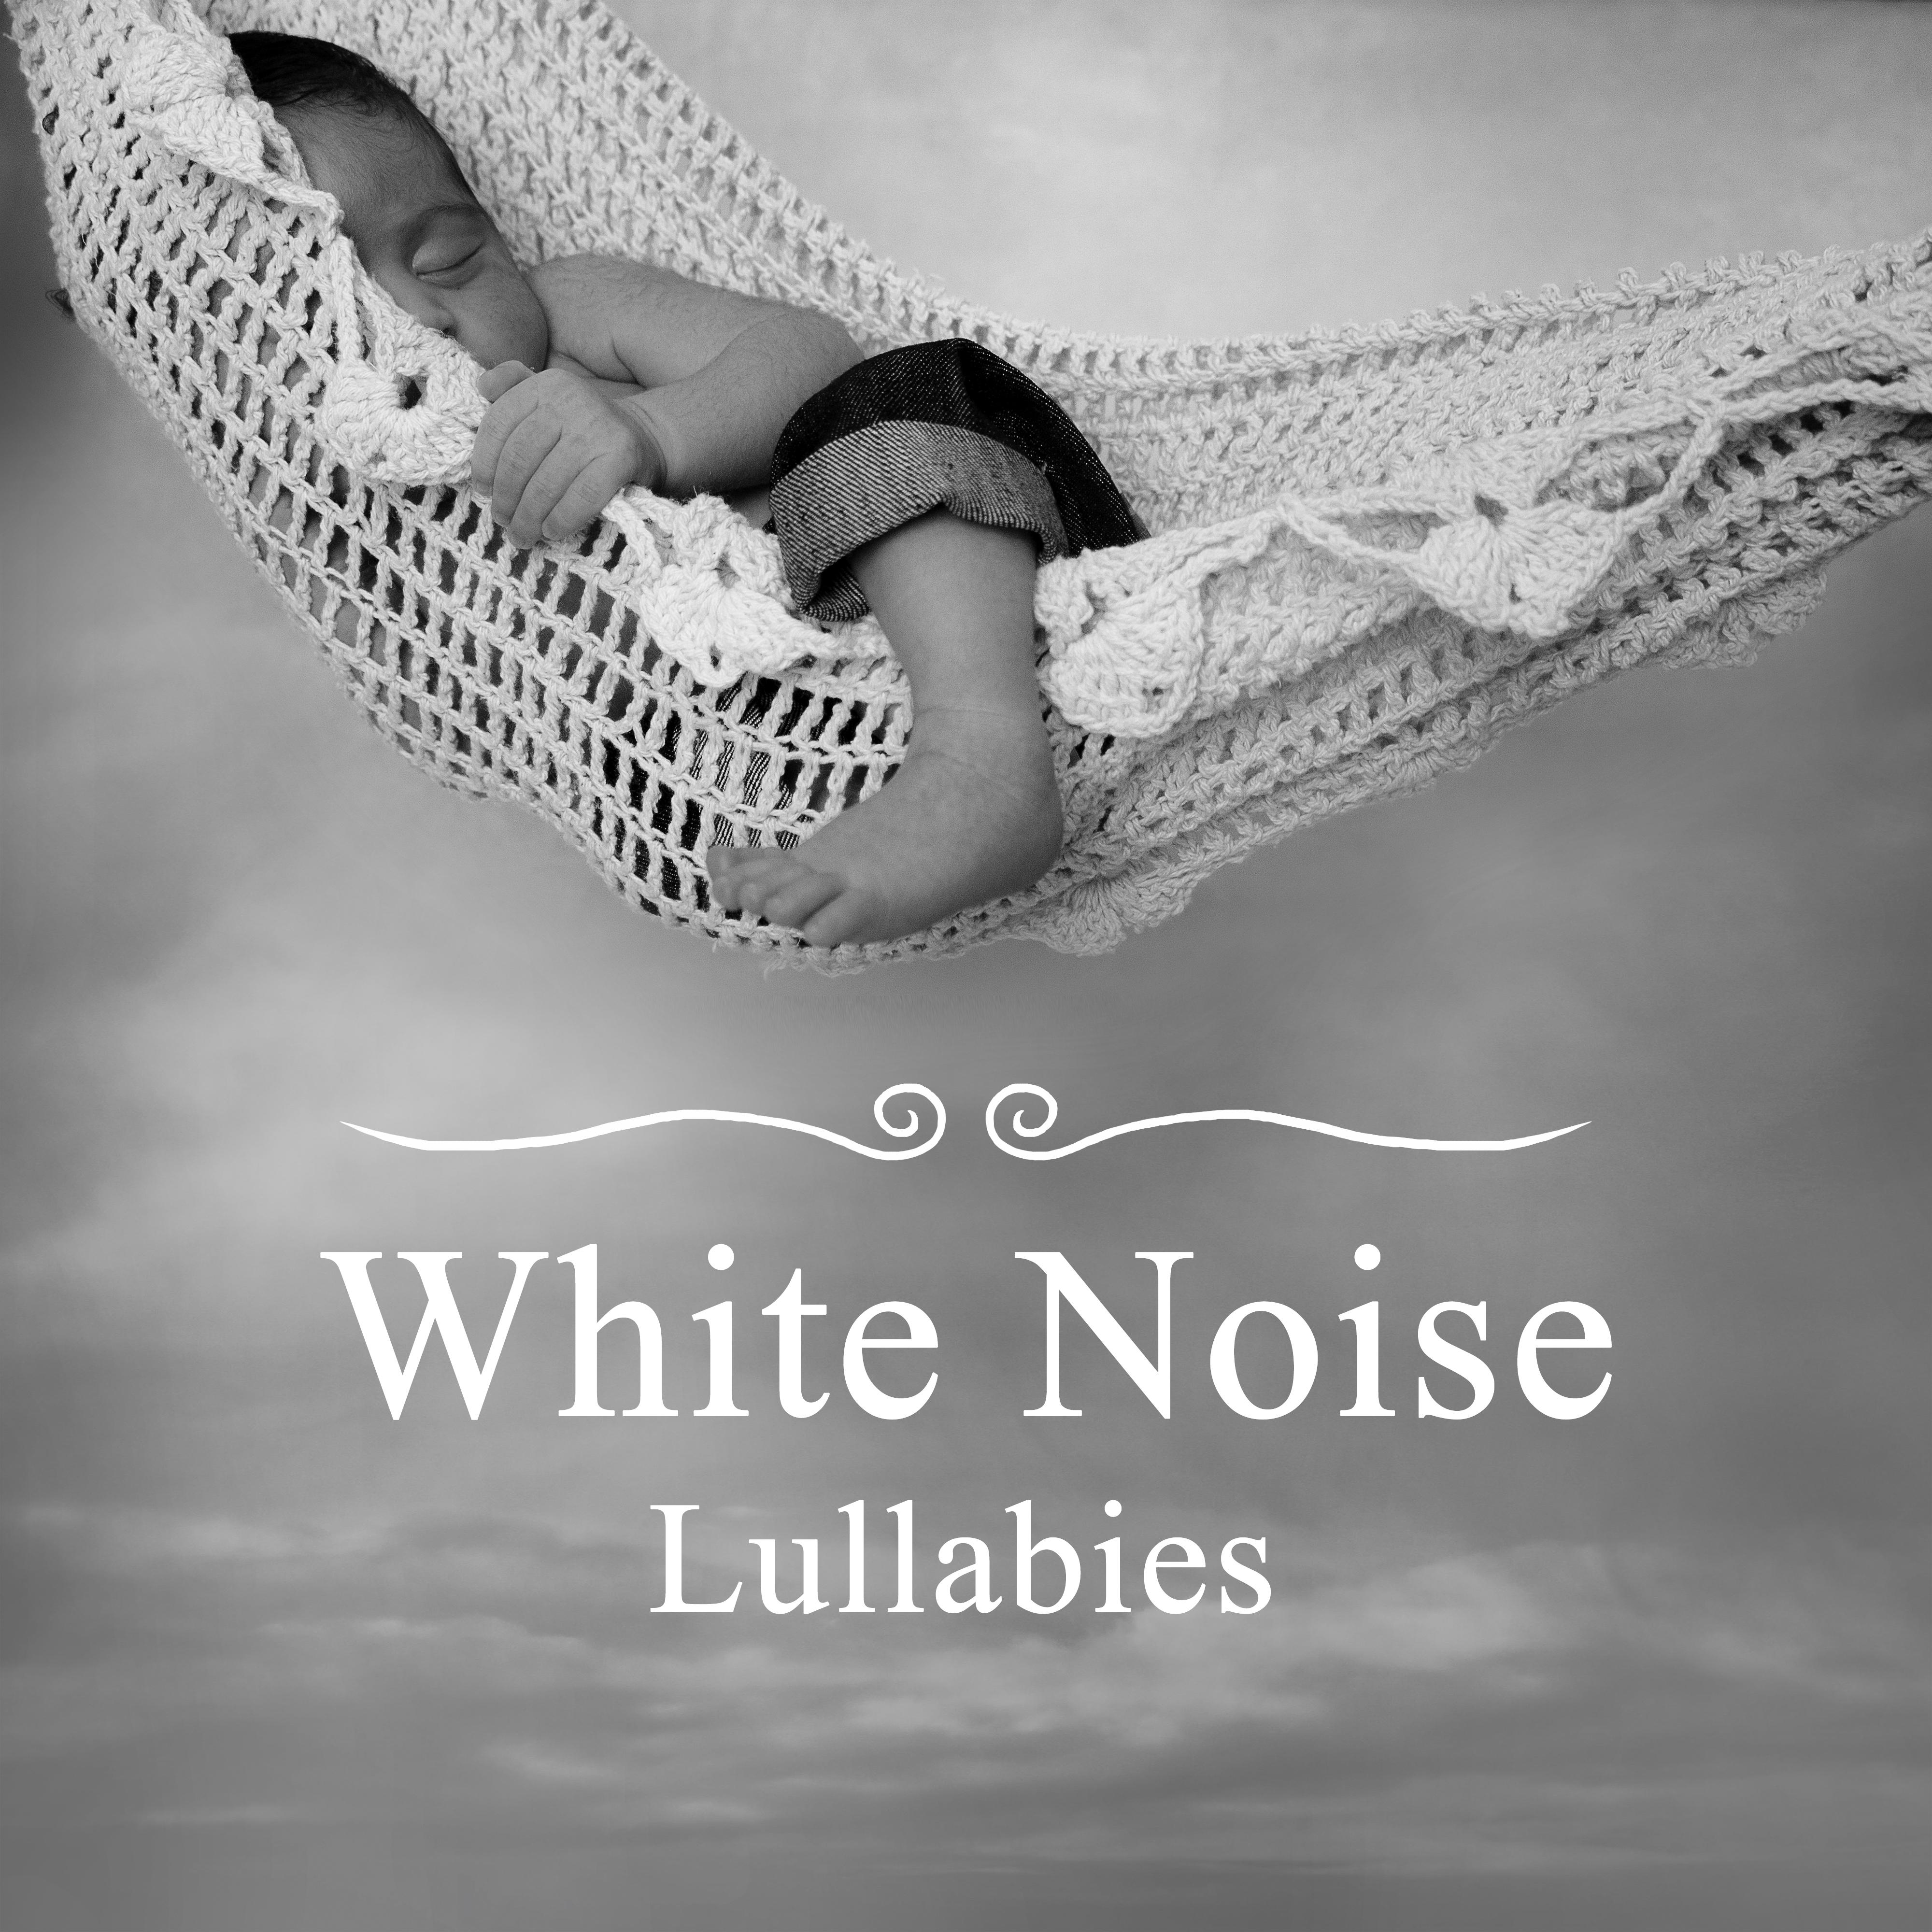 White Noise Lullabies  Calming New Age Music for Babies, Calm Down Baby, Helpful for Relax Baby  Fall Asleep, Deep Sleep Baby